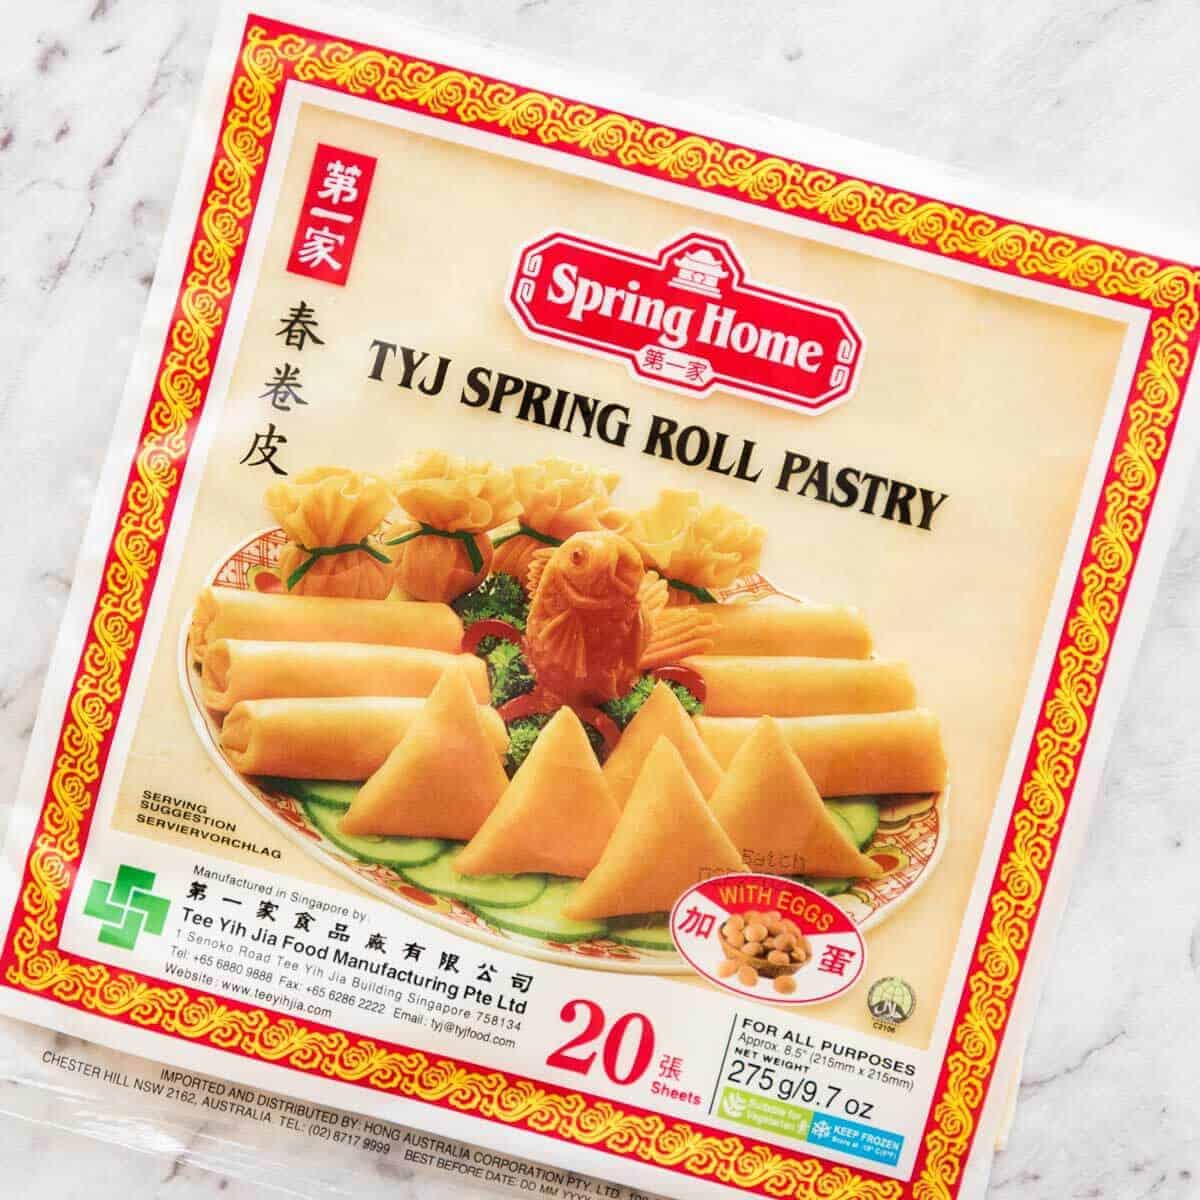 IV. Step-by-Step Guide to Making Homemade Spring Roll Wrappers